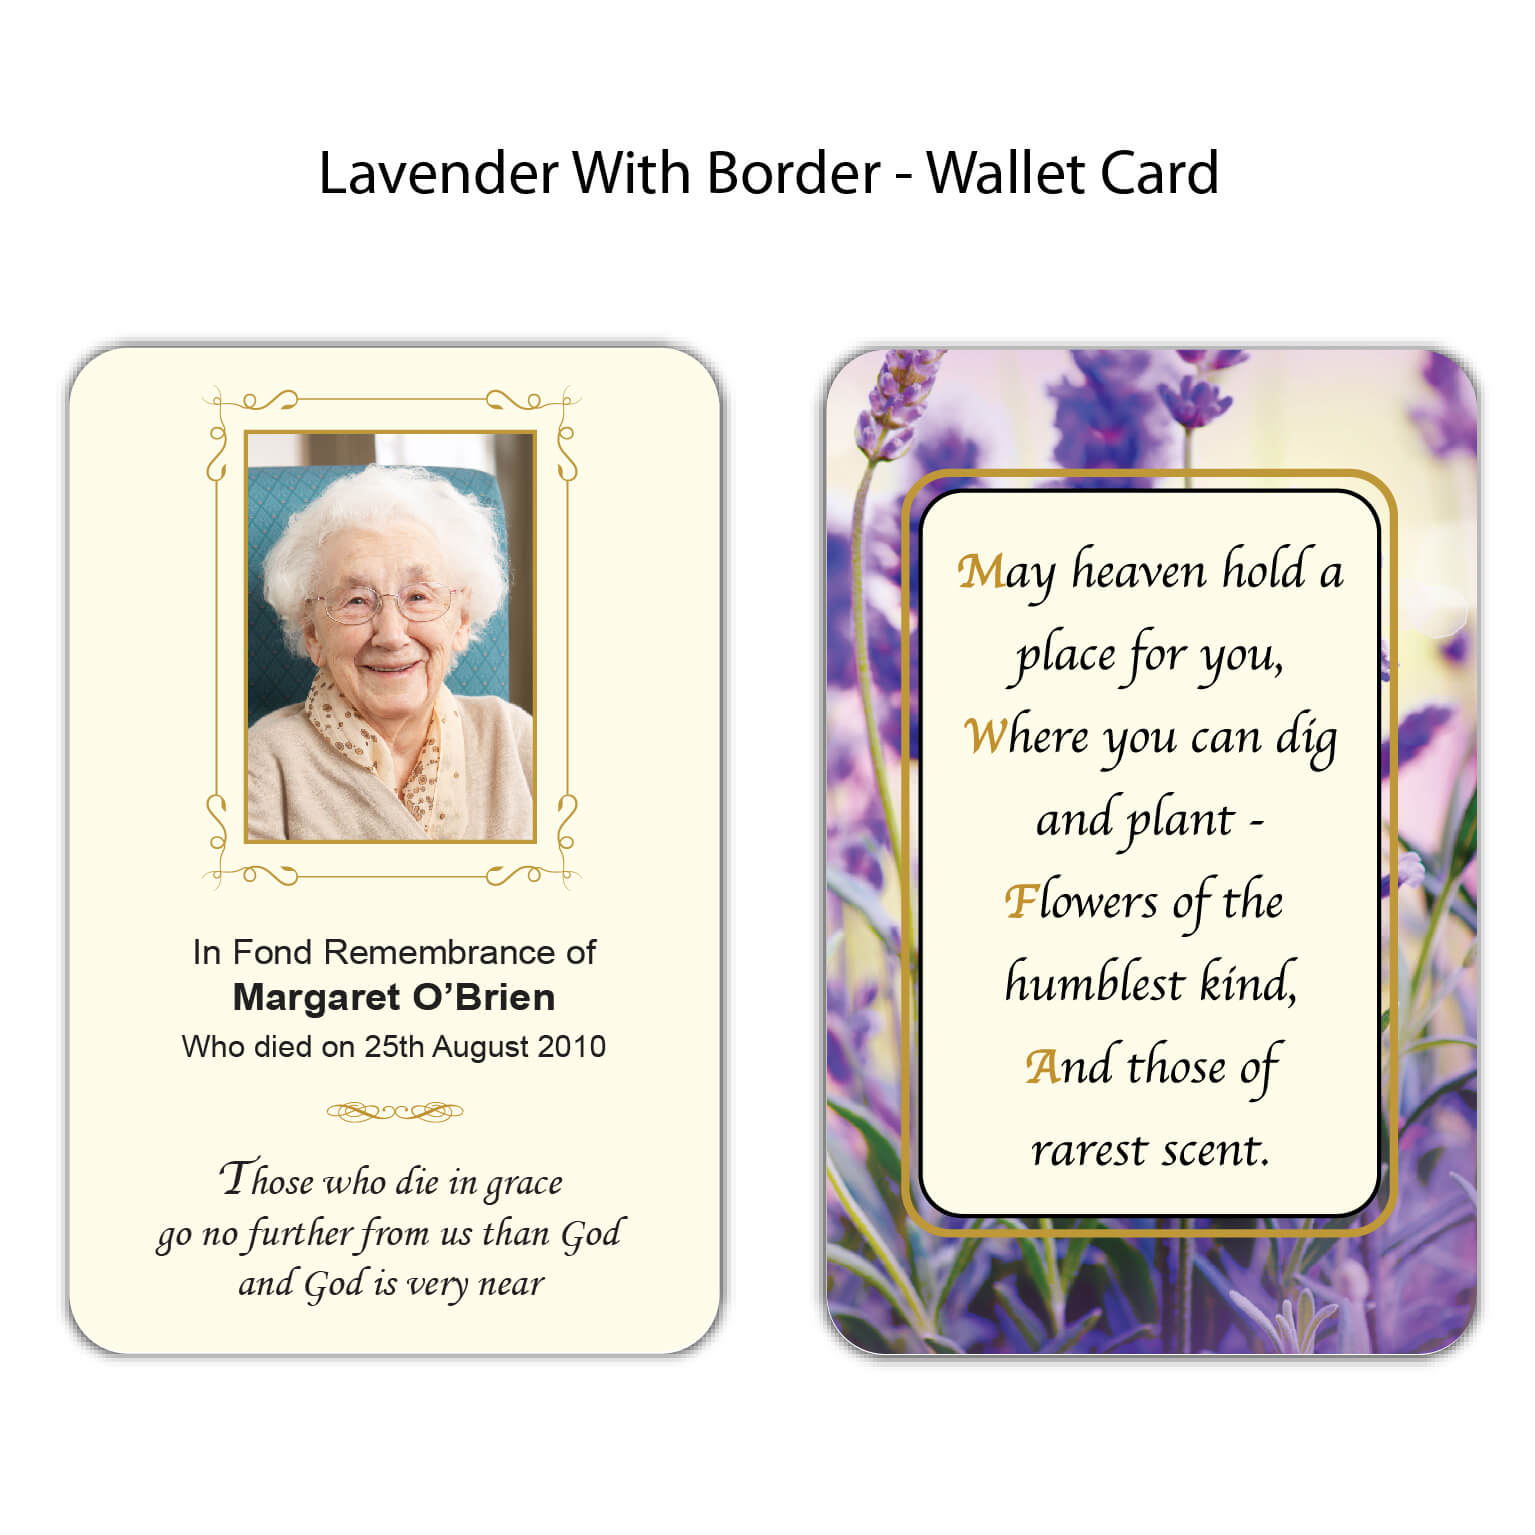 Lavender with Border Wallet Cards